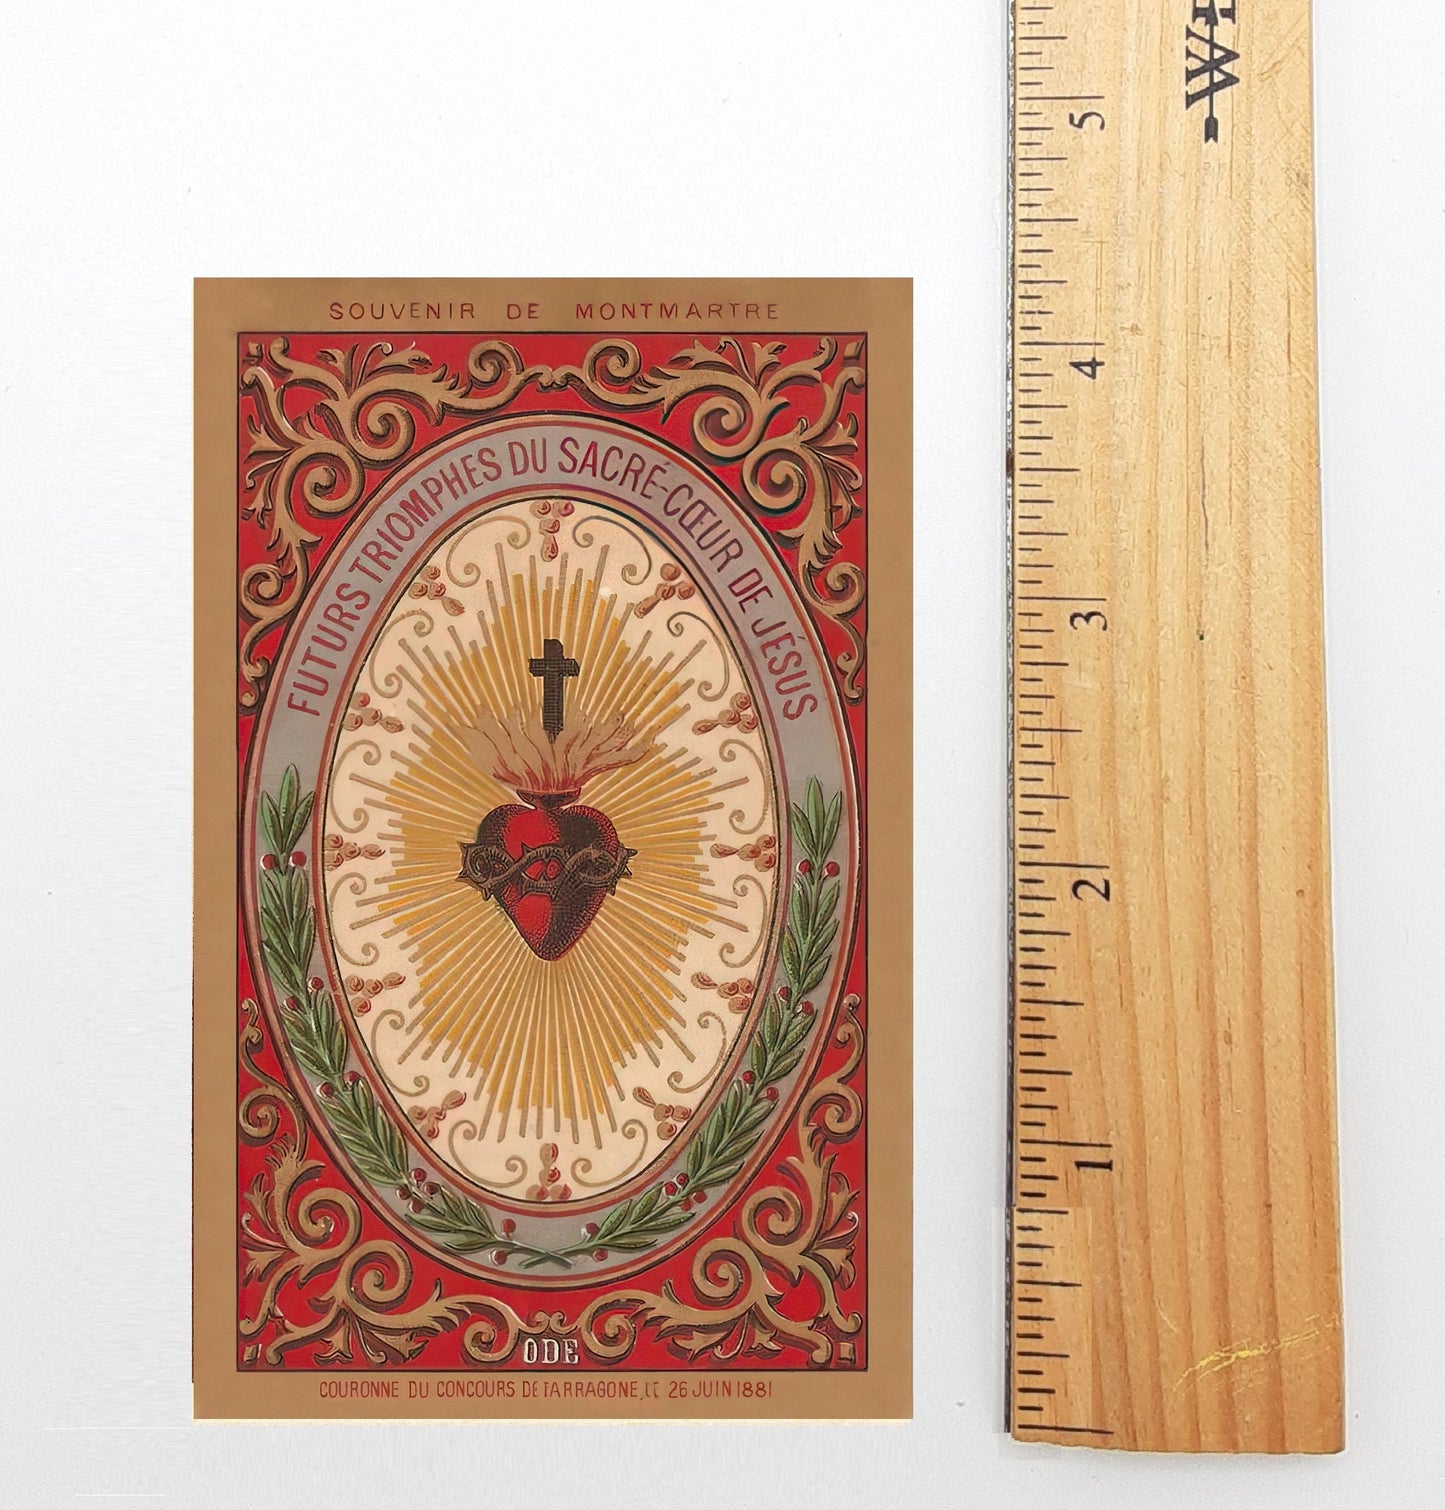 New! Future Triumphs of the Sacred Heart – Sacre Coeur Basilica – Restored Vintage Holy Card – pack of 10/100/1000